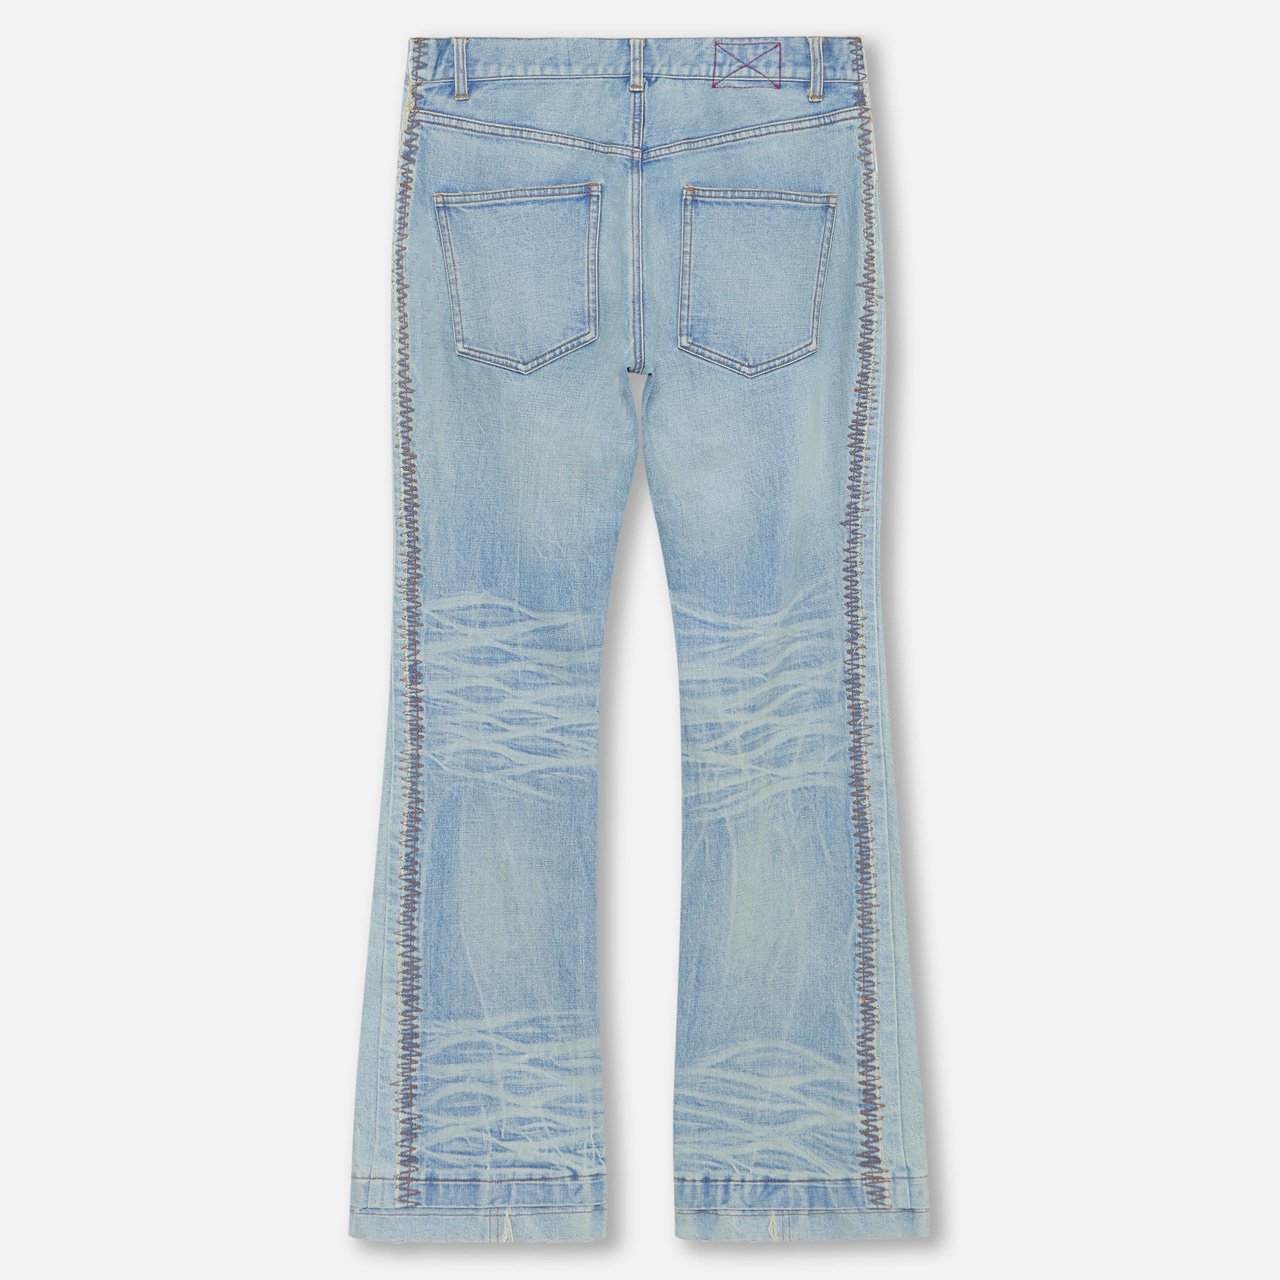 <img class='new_mark_img1' src='https://img.shop-pro.jp/img/new/icons5.gif' style='border:none;display:inline;margin:0px;padding:0px;width:auto;' />MLVINCE () | DB FLARE JEANS LIGHT INDIGO